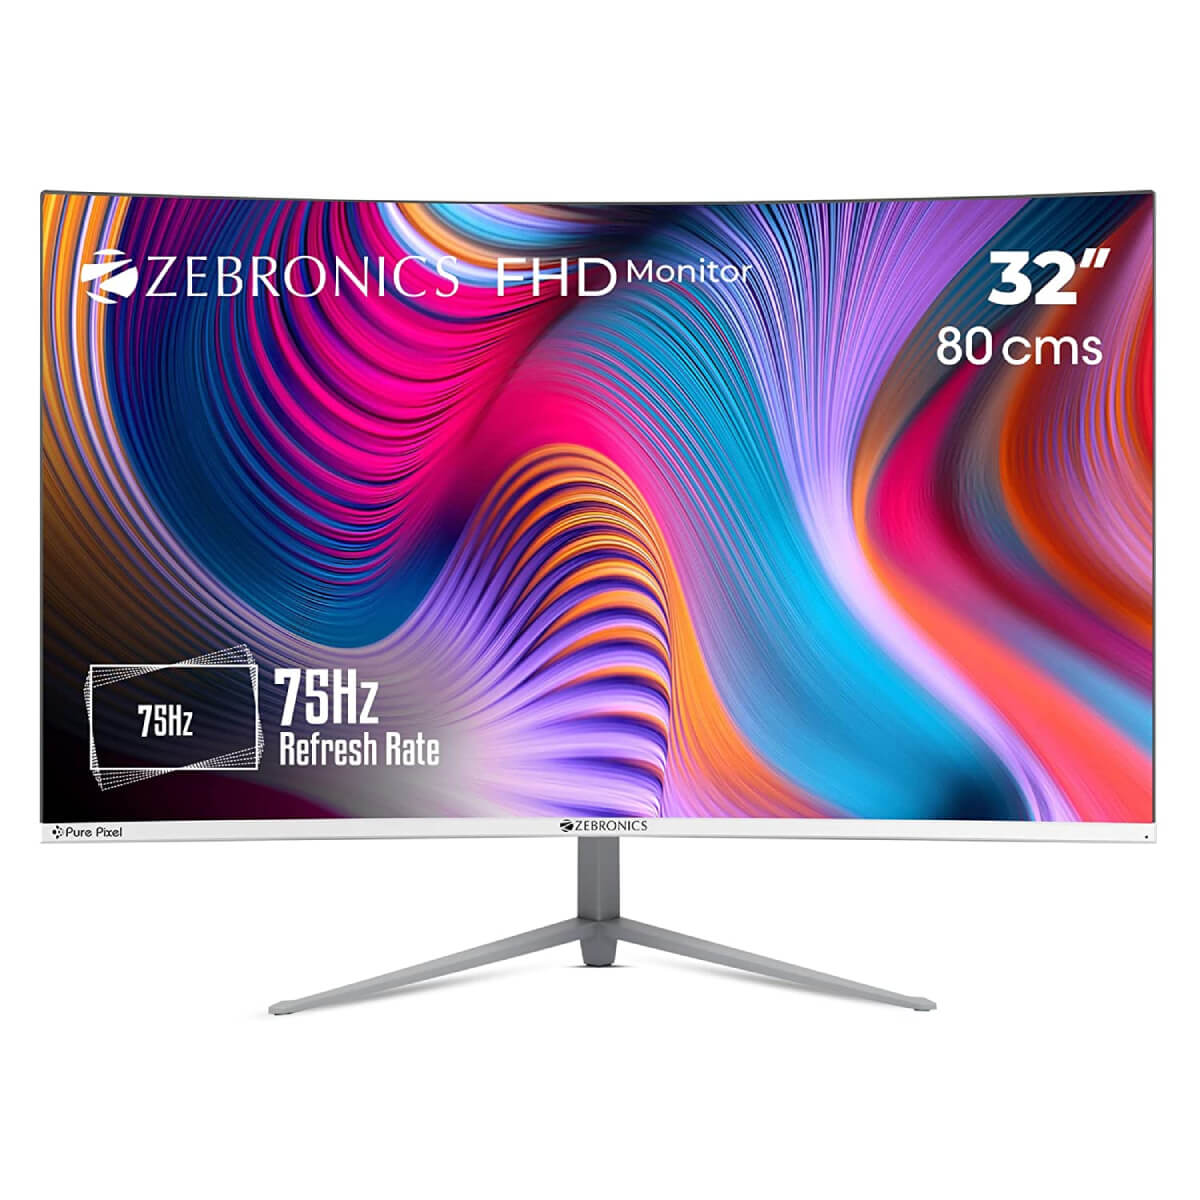 Zebronics ZEB-AC32FHD Curved Ultra Slim LED Monitor with 80cm (32”) Wide  Screen, Full HD 1920x1080, 75Hz Refresh Rate, HDMI, VGA, 250cd/m²  Brightness, Built in Speaker and Wall mountable Hungamastart Online